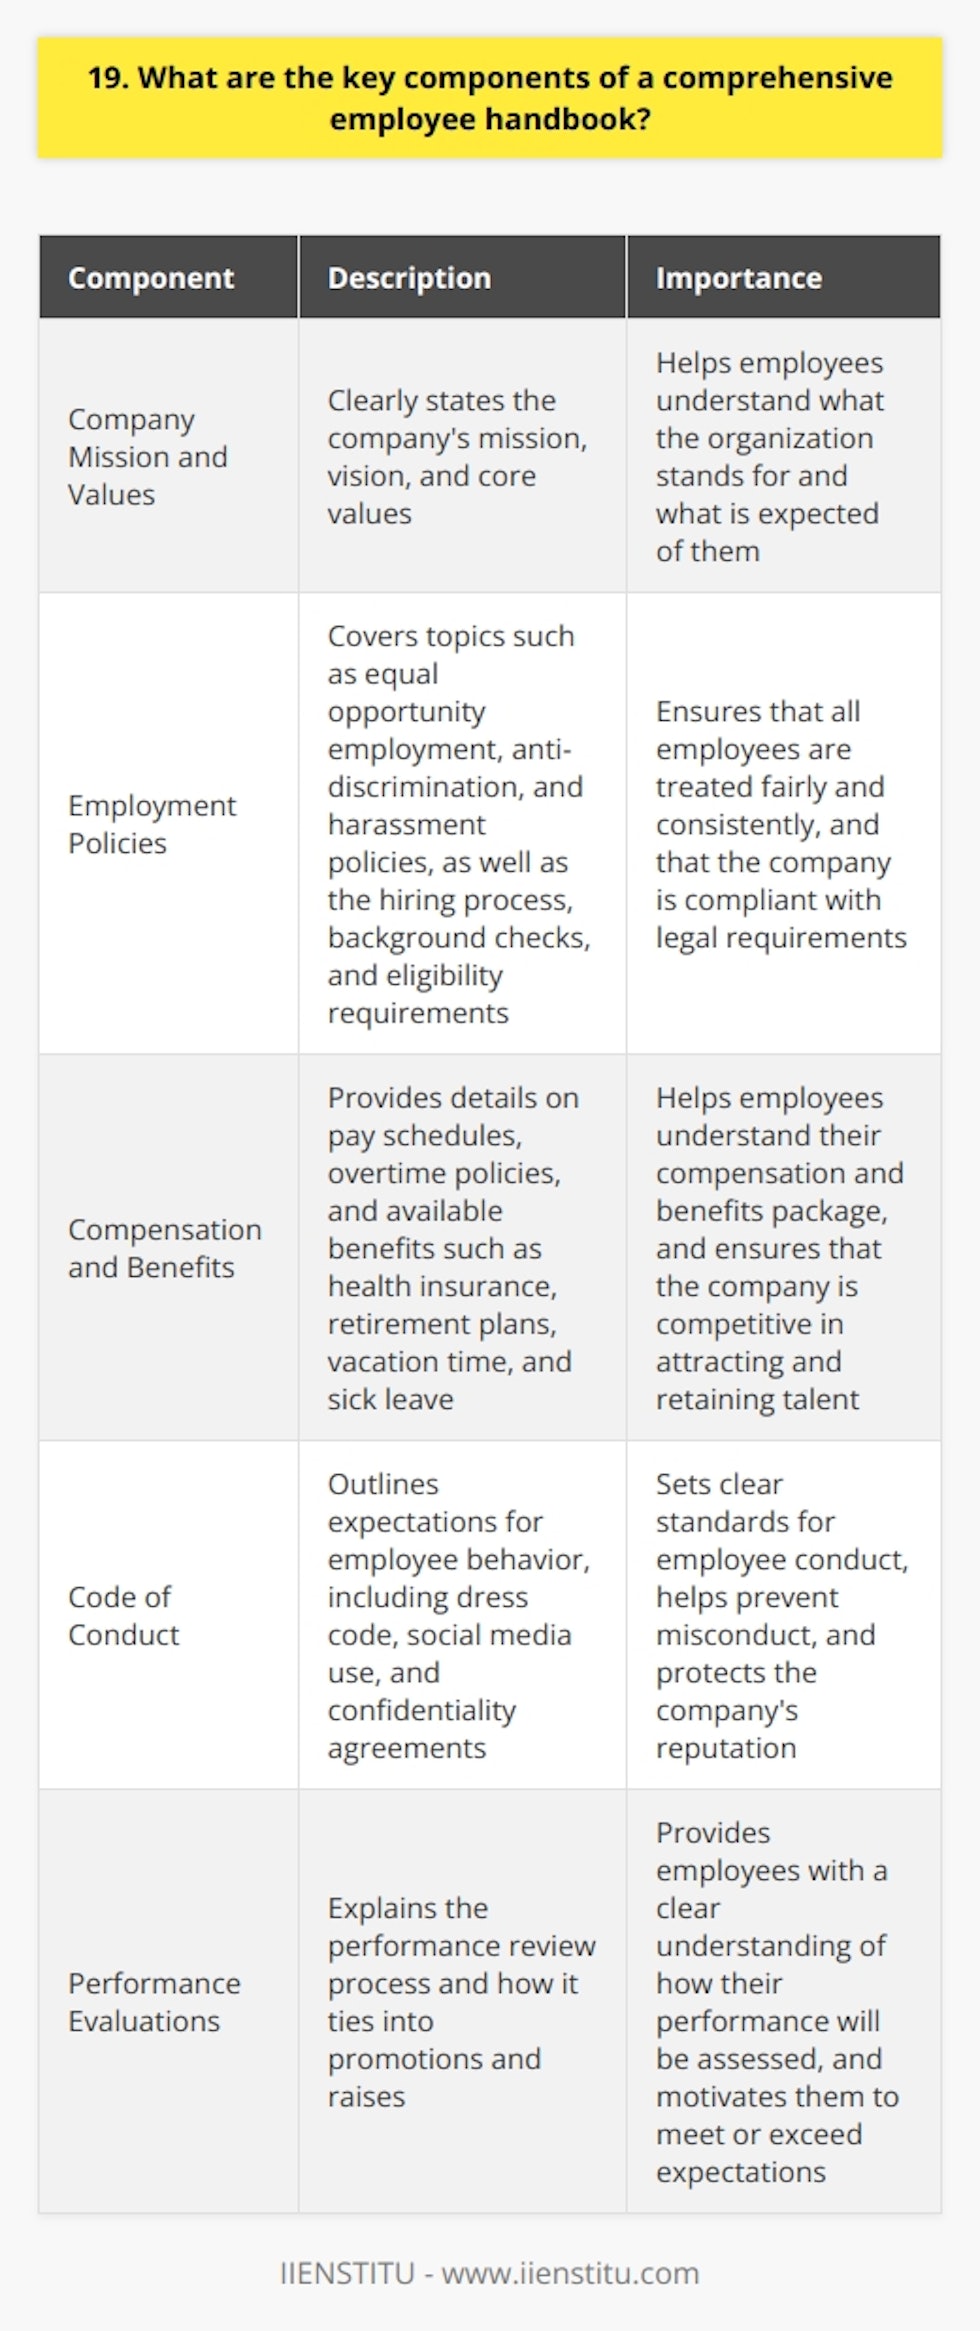 A comprehensive employee handbook is a crucial document that outlines company policies, procedures, and expectations. It serves as a guideline for both employees and employers, ensuring everyone is on the same page. Key Components of an Employee Handbook Company Mission and Values The handbook should start by clearly stating the companys mission, vision, and core values. This helps employees understand what the organization stands for and what is expected of them. Employment Policies This section should cover topics such as equal opportunity employment, anti-discrimination, and harassment policies. It should also outline the hiring process, background checks, and eligibility requirements. Compensation and Benefits The handbook should provide details on pay schedules, overtime policies, and any available benefits. This includes health insurance, retirement plans, vacation time, and sick leave. Code of Conduct Every company has certain expectations for employee behavior. The handbook should clearly outline these expectations, including dress code, social media use, and confidentiality agreements. Performance Evaluations Employees should know how their performance will be measured and evaluated. The handbook should explain the performance review process and how it ties into promotions and raises. In my experience, having a well-crafted employee handbook has been invaluable. It provides a sense of security and clarity for everyone involved. When I started my current job, the handbook was my go-to resource for any questions I had about company policies. A comprehensive employee handbook is essential for any organization. It ensures everyone is aware of the companys expectations and helps create a positive work environment.